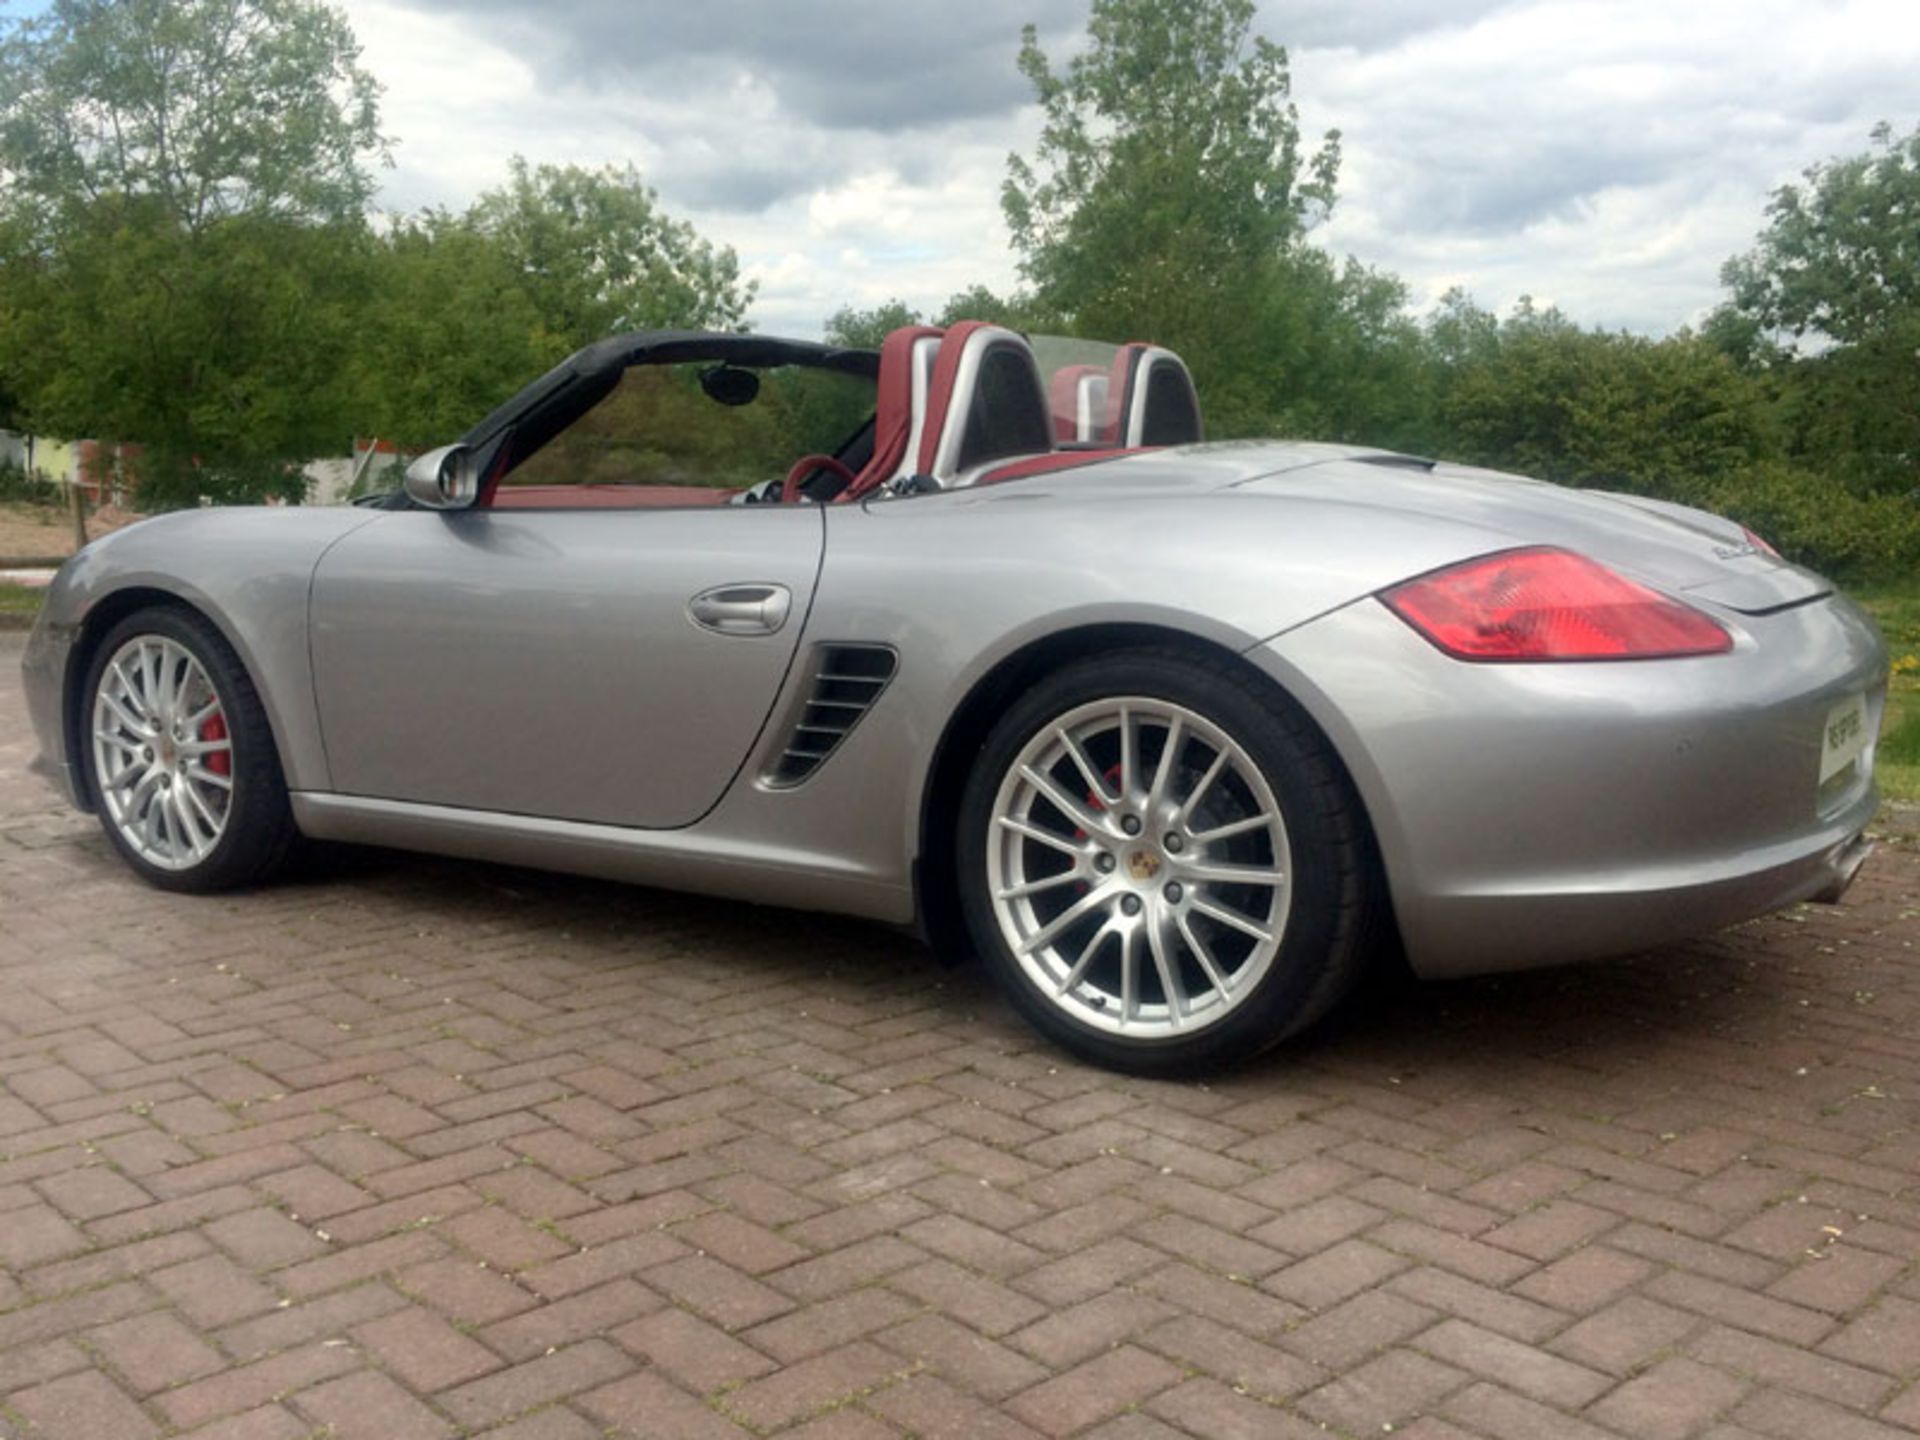 2008 Porsche Boxster RS 60 Spyder - Image 4 of 7